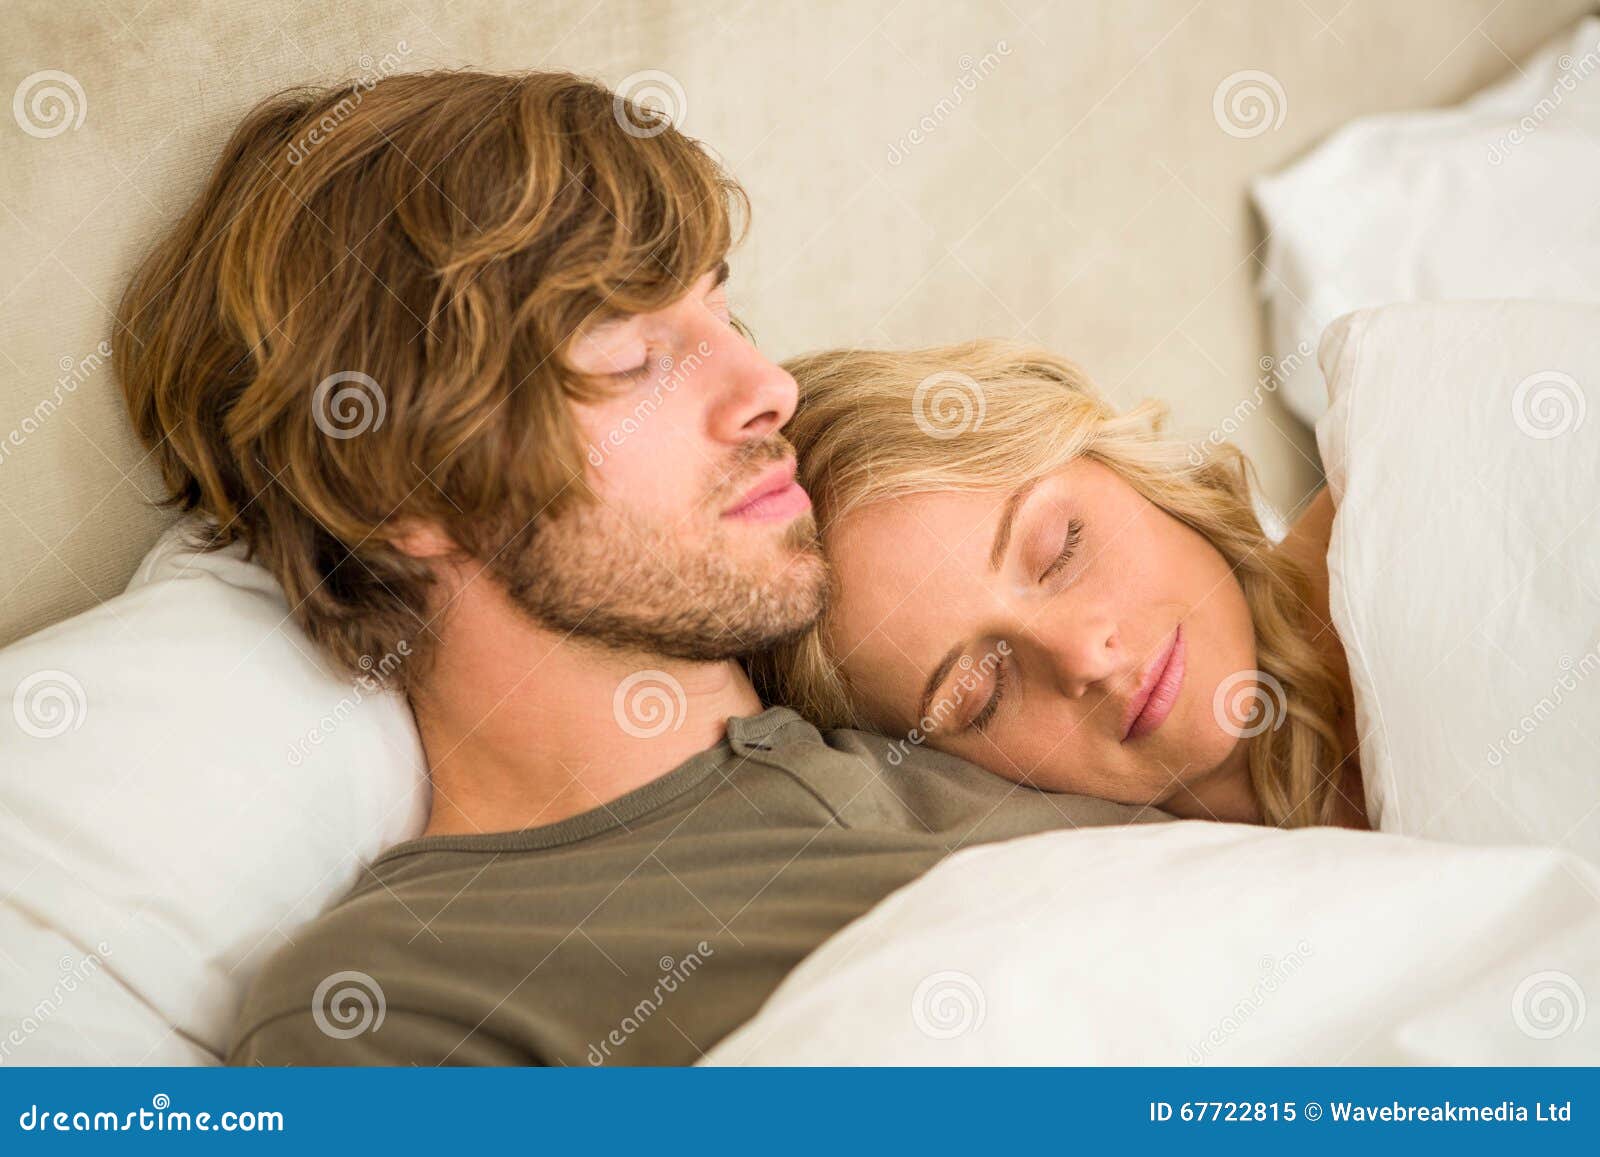 Cute Couple Sleeping on Their Bed Stock Image - Image of love ...